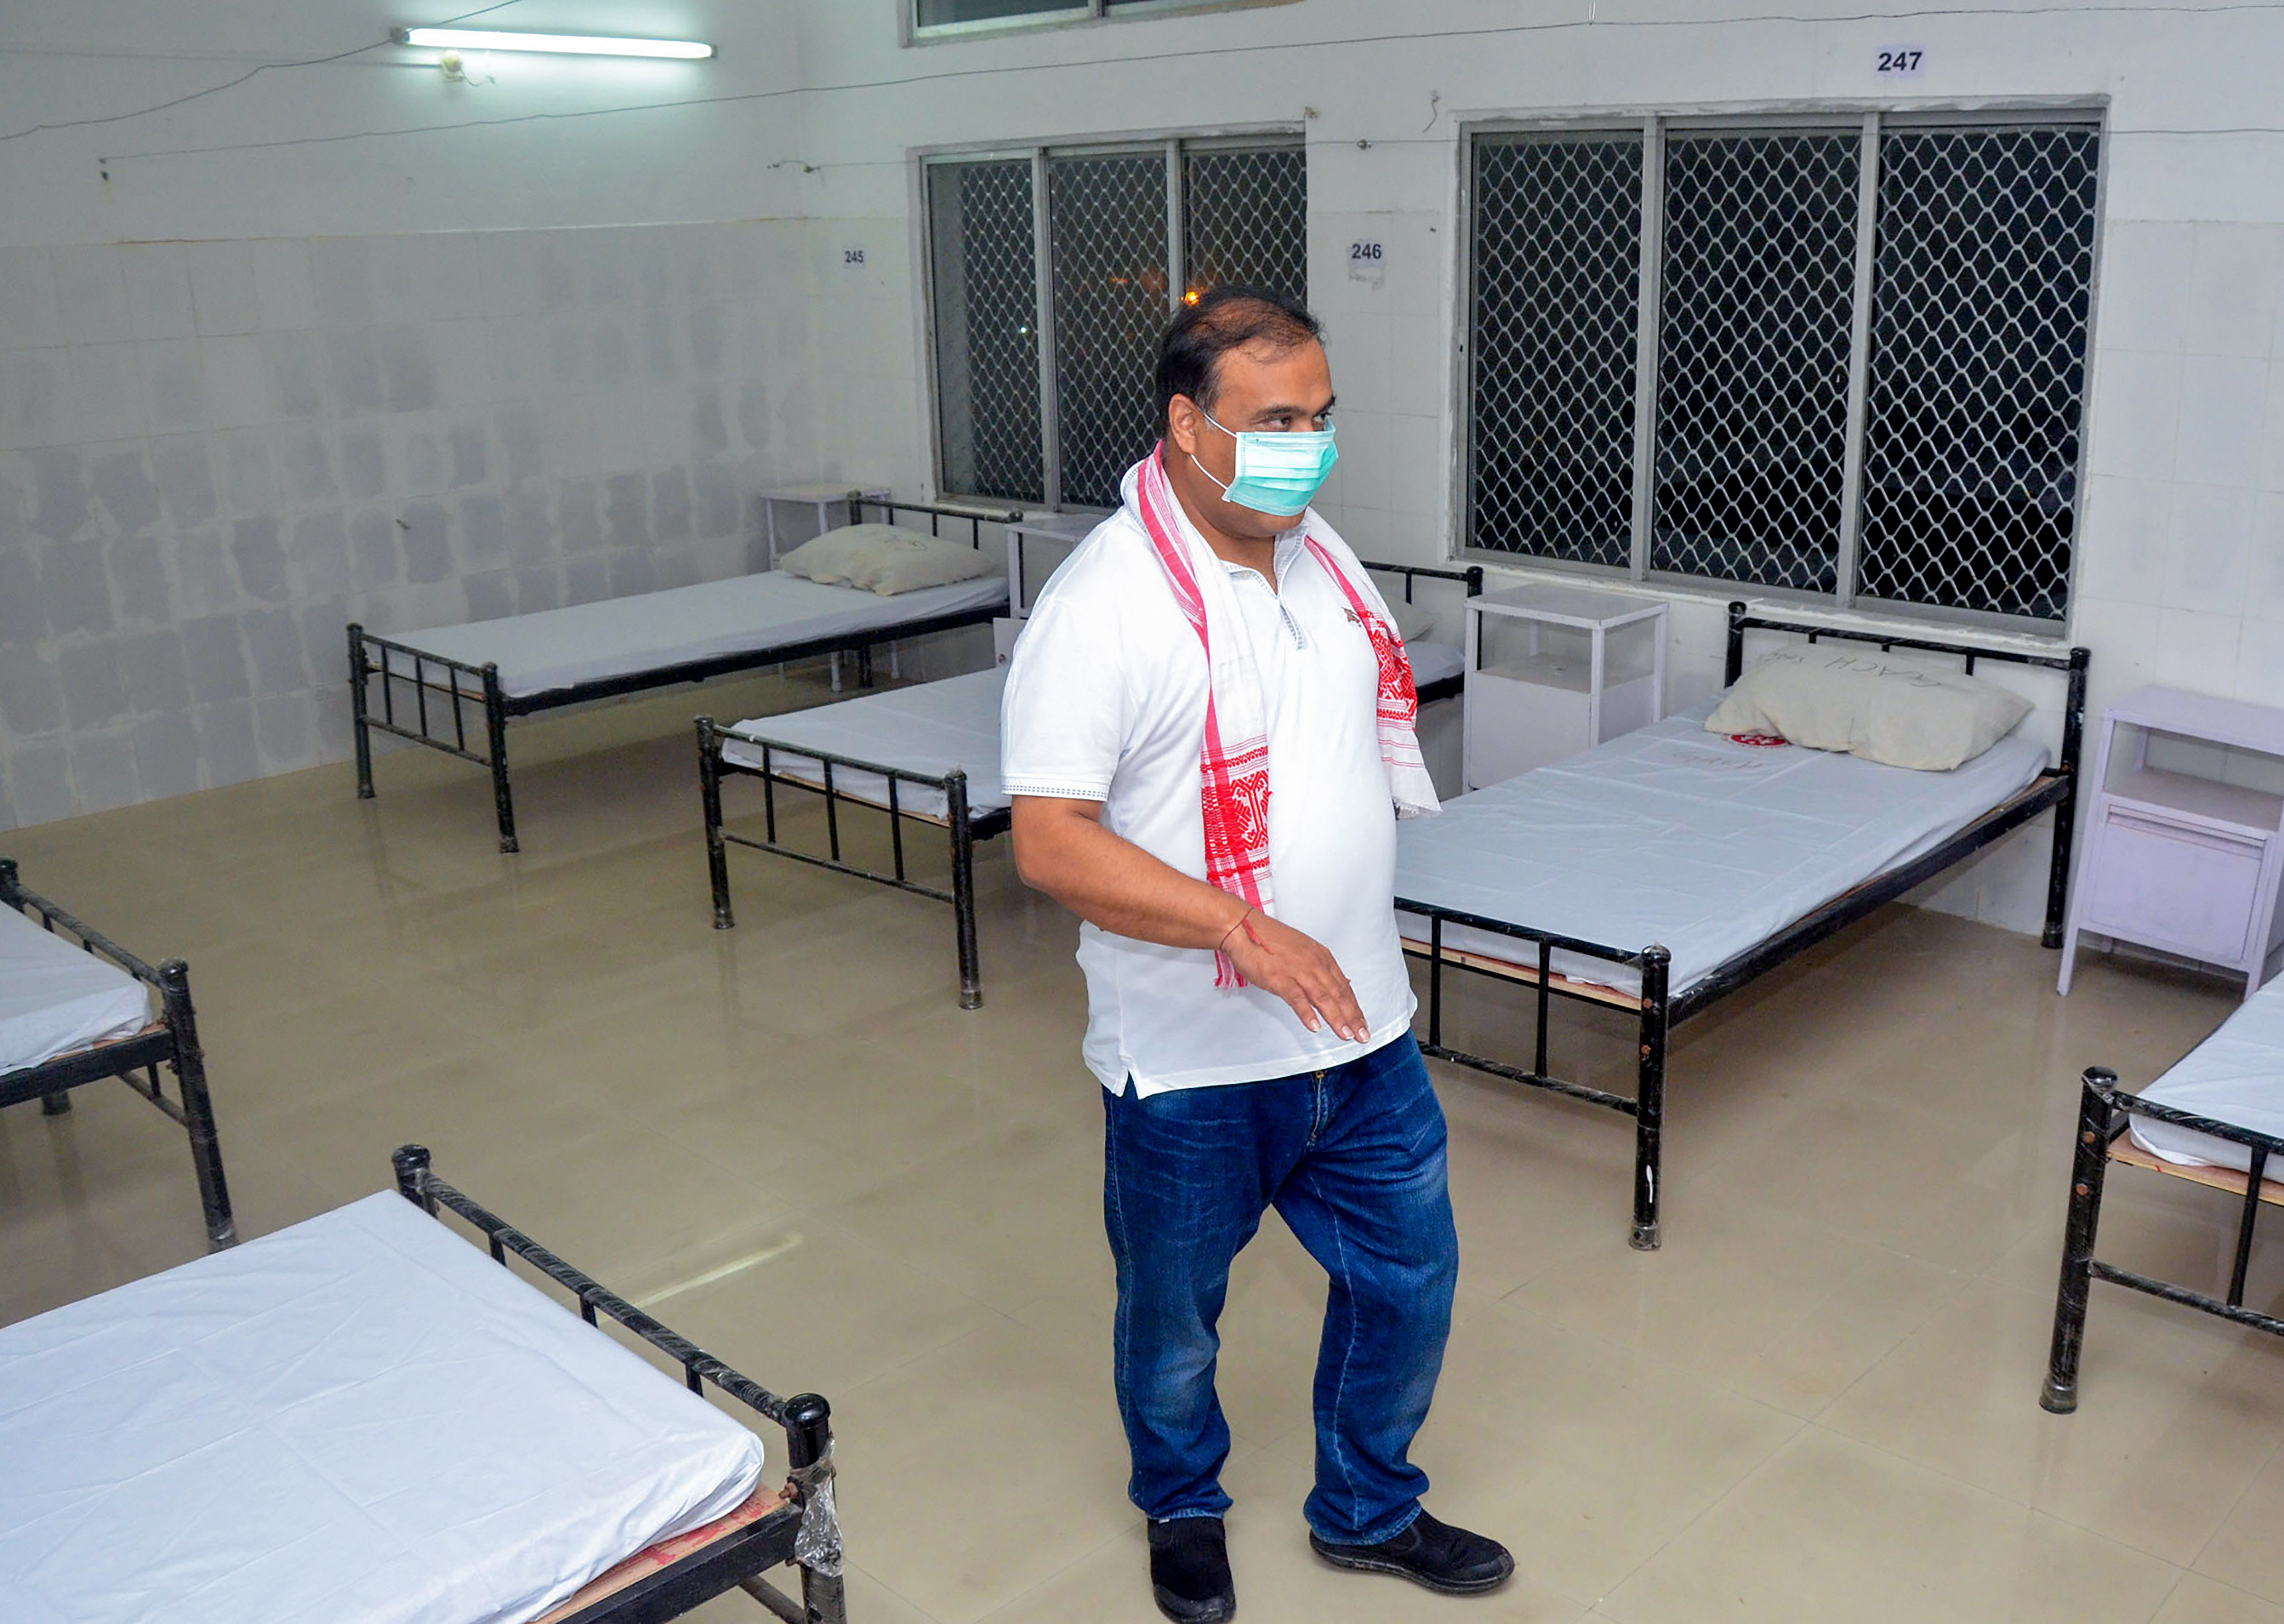 Assam State Finance, Health and Family Welfare Minister Himanta Biswa Sarma wearing a face mask reviews a quarantine centre setup for COVID19 patients, at Jalukbari in Guwahati. (PTI Photo)